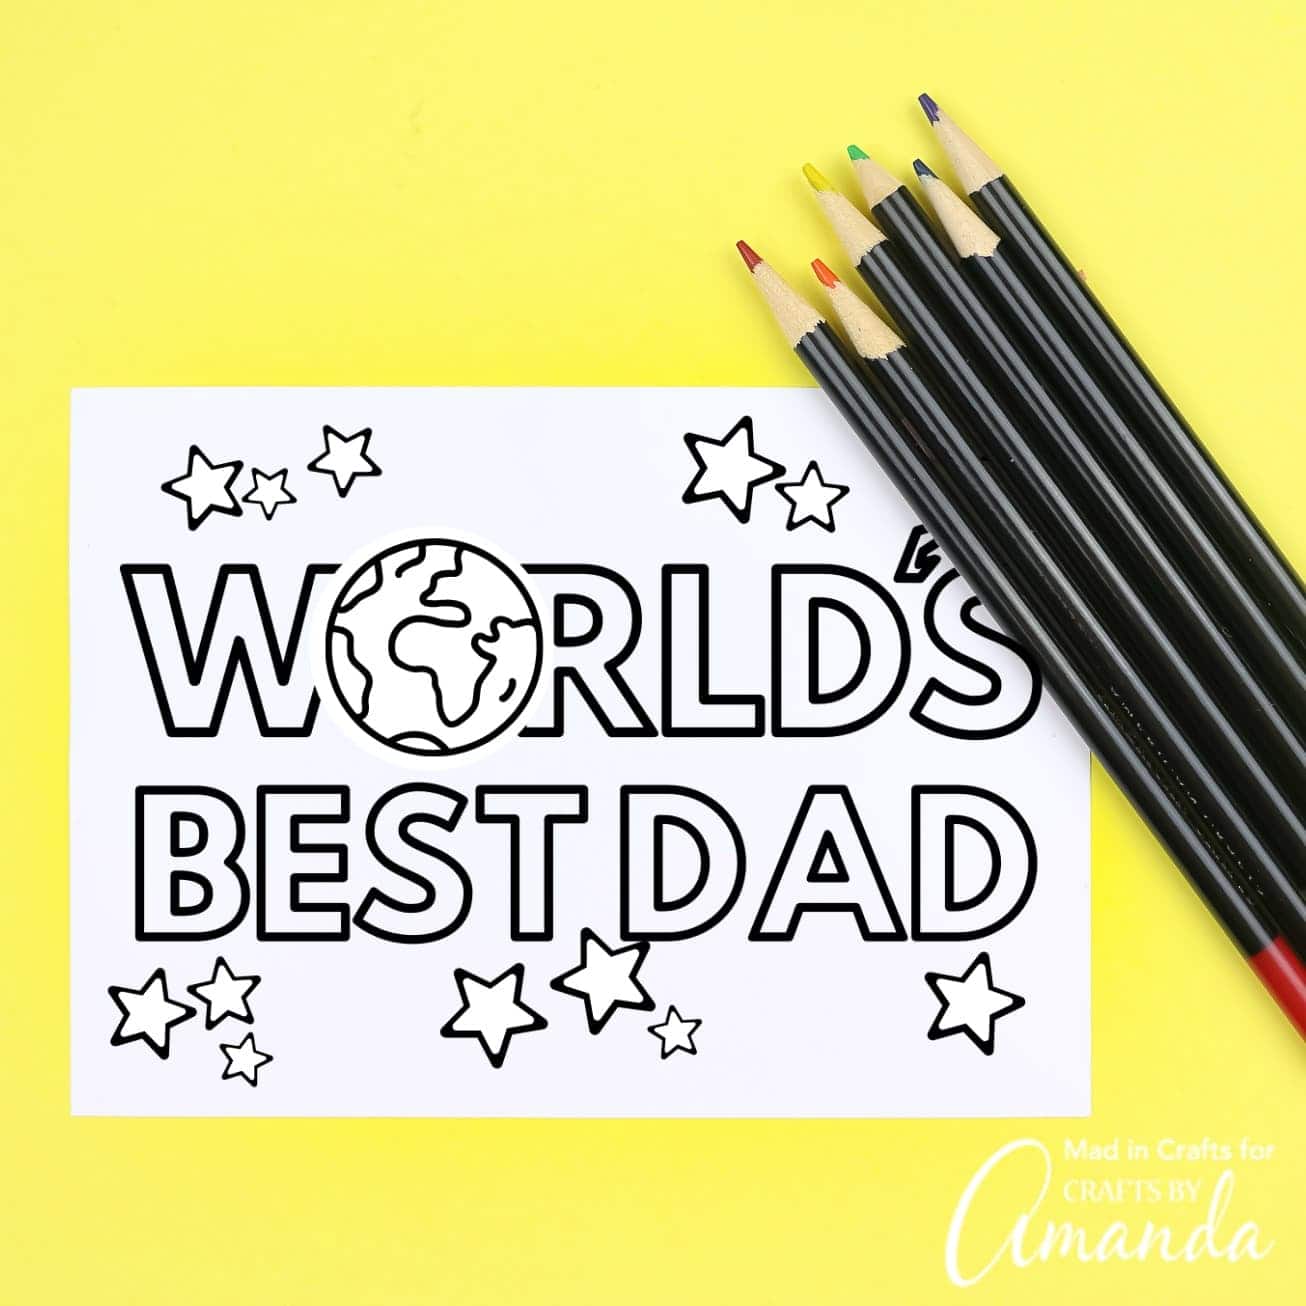 printable father s day card crafts by amanda